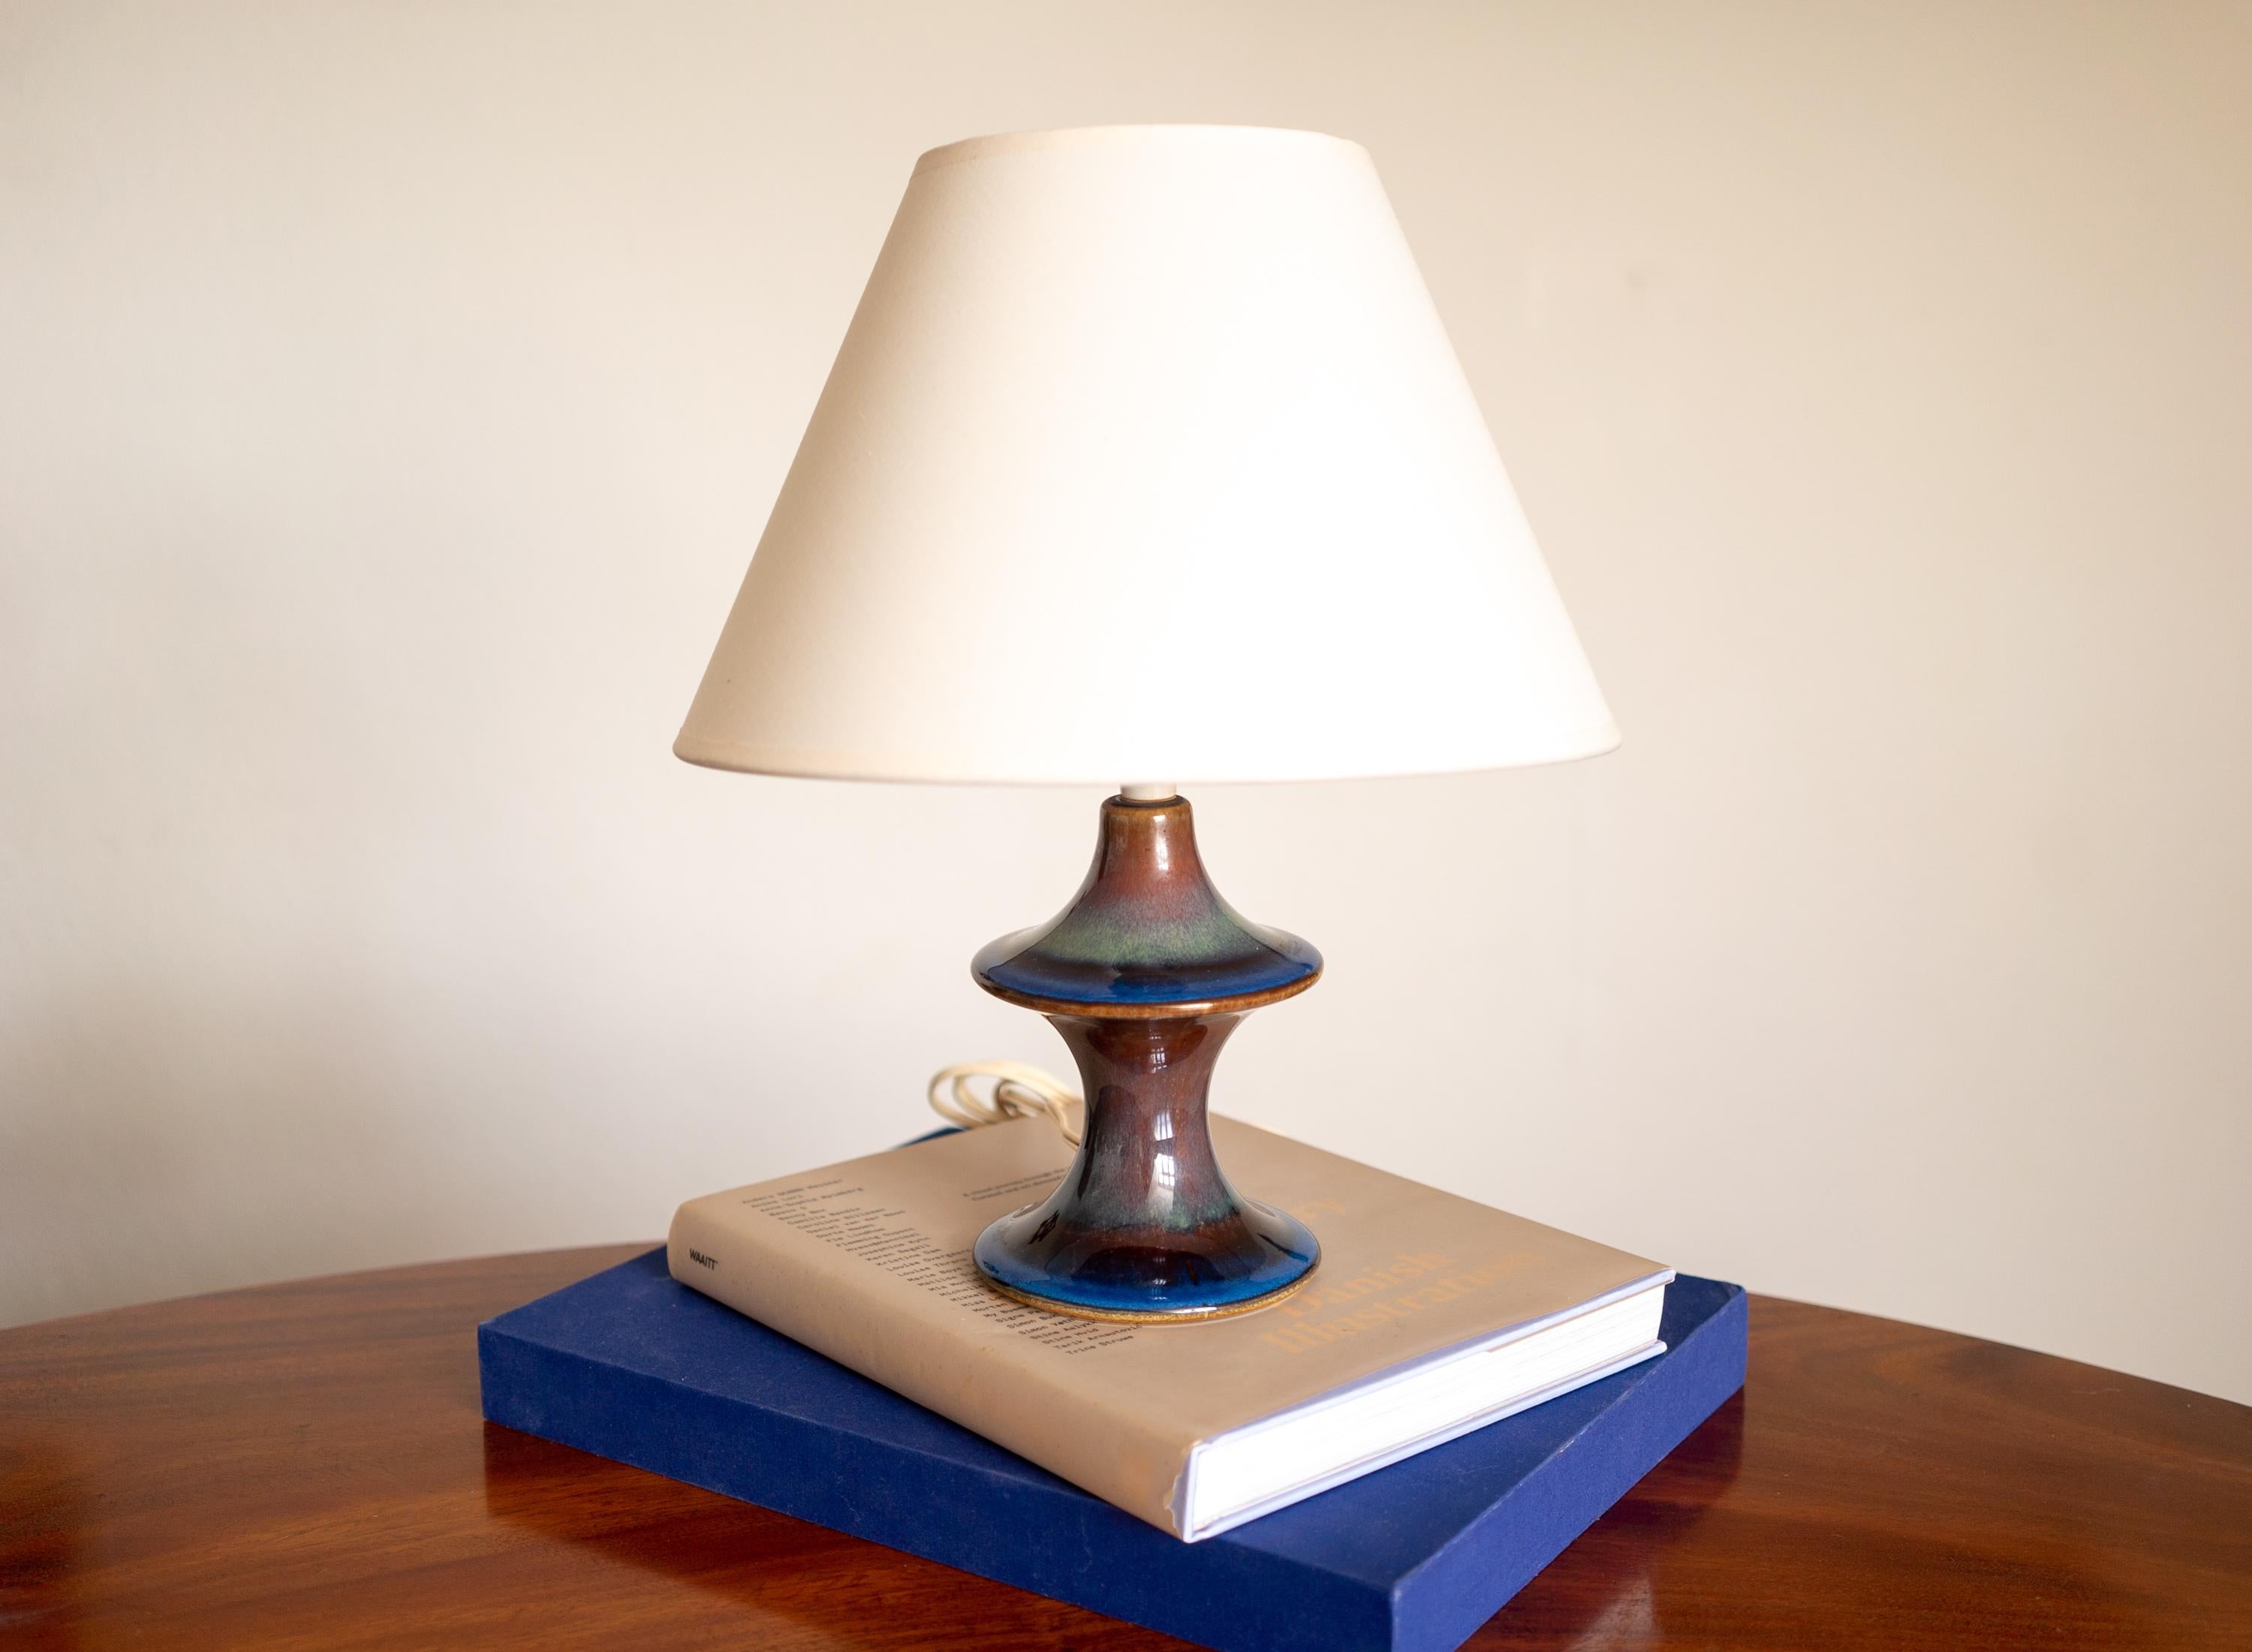 A blue-glazed stoneware table lamp designed and produced by Søholm,  Denmark, 1970s.

Sold without Lampshade. European plug.